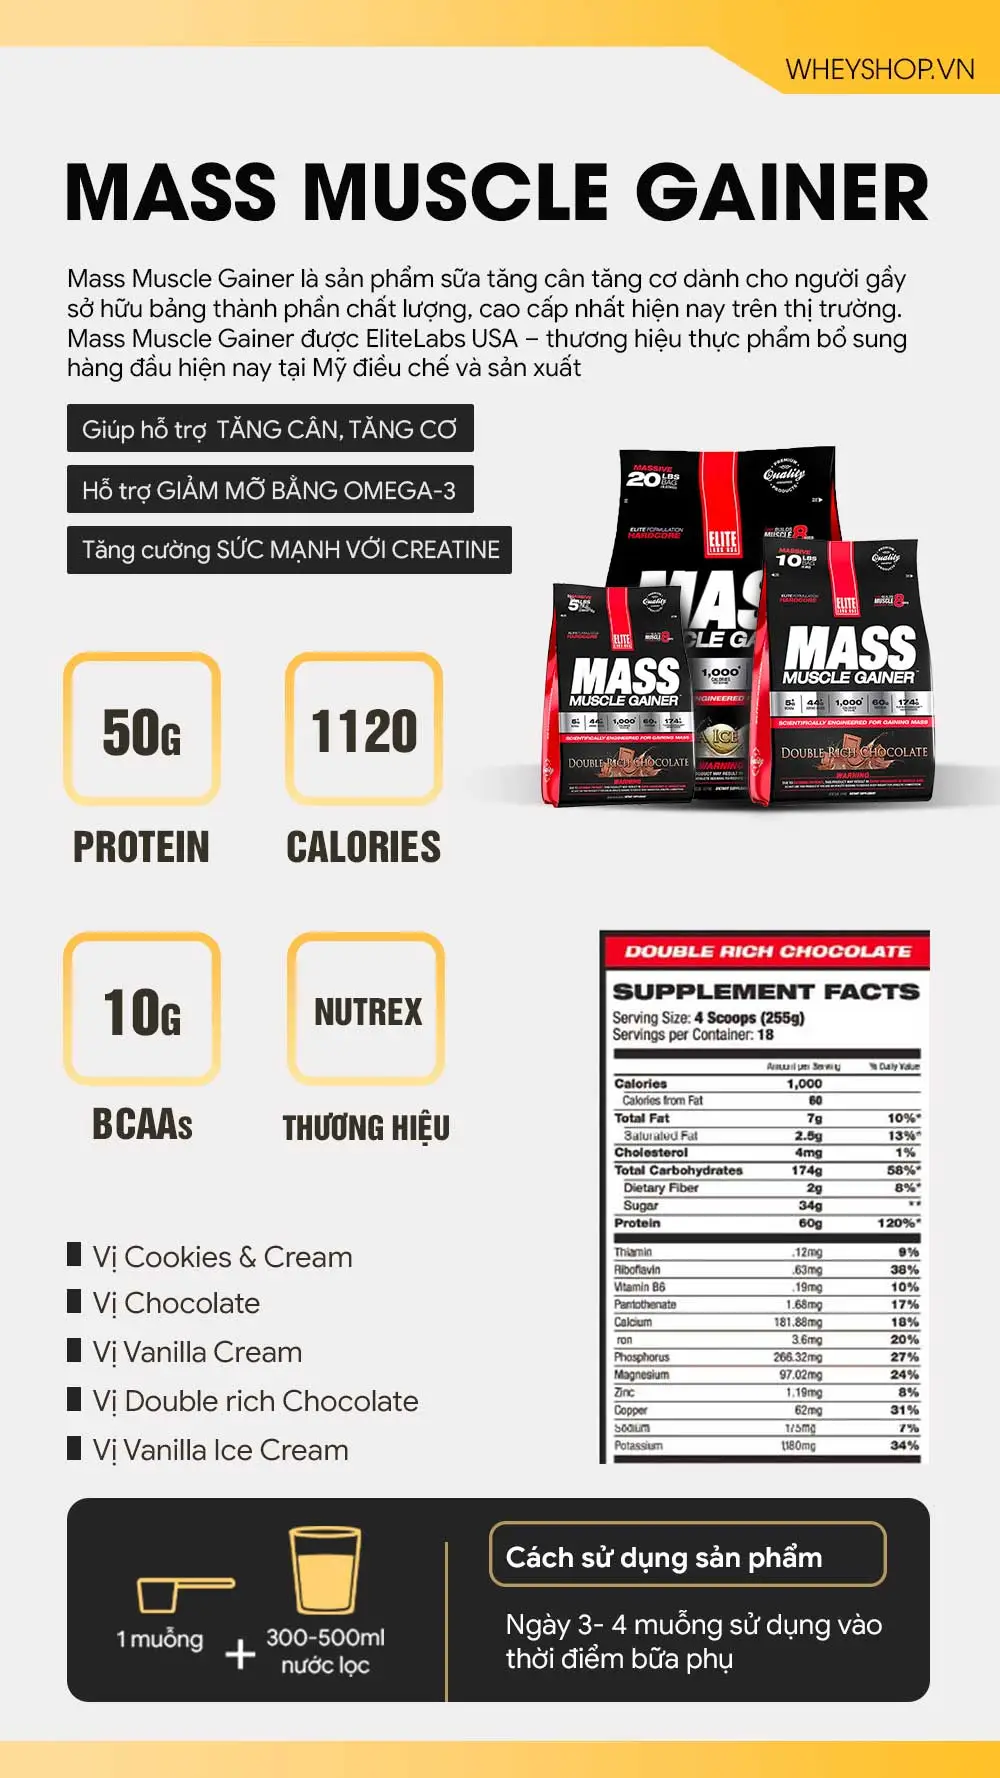 mass-muscle-gainer-5lbs-2-3kg